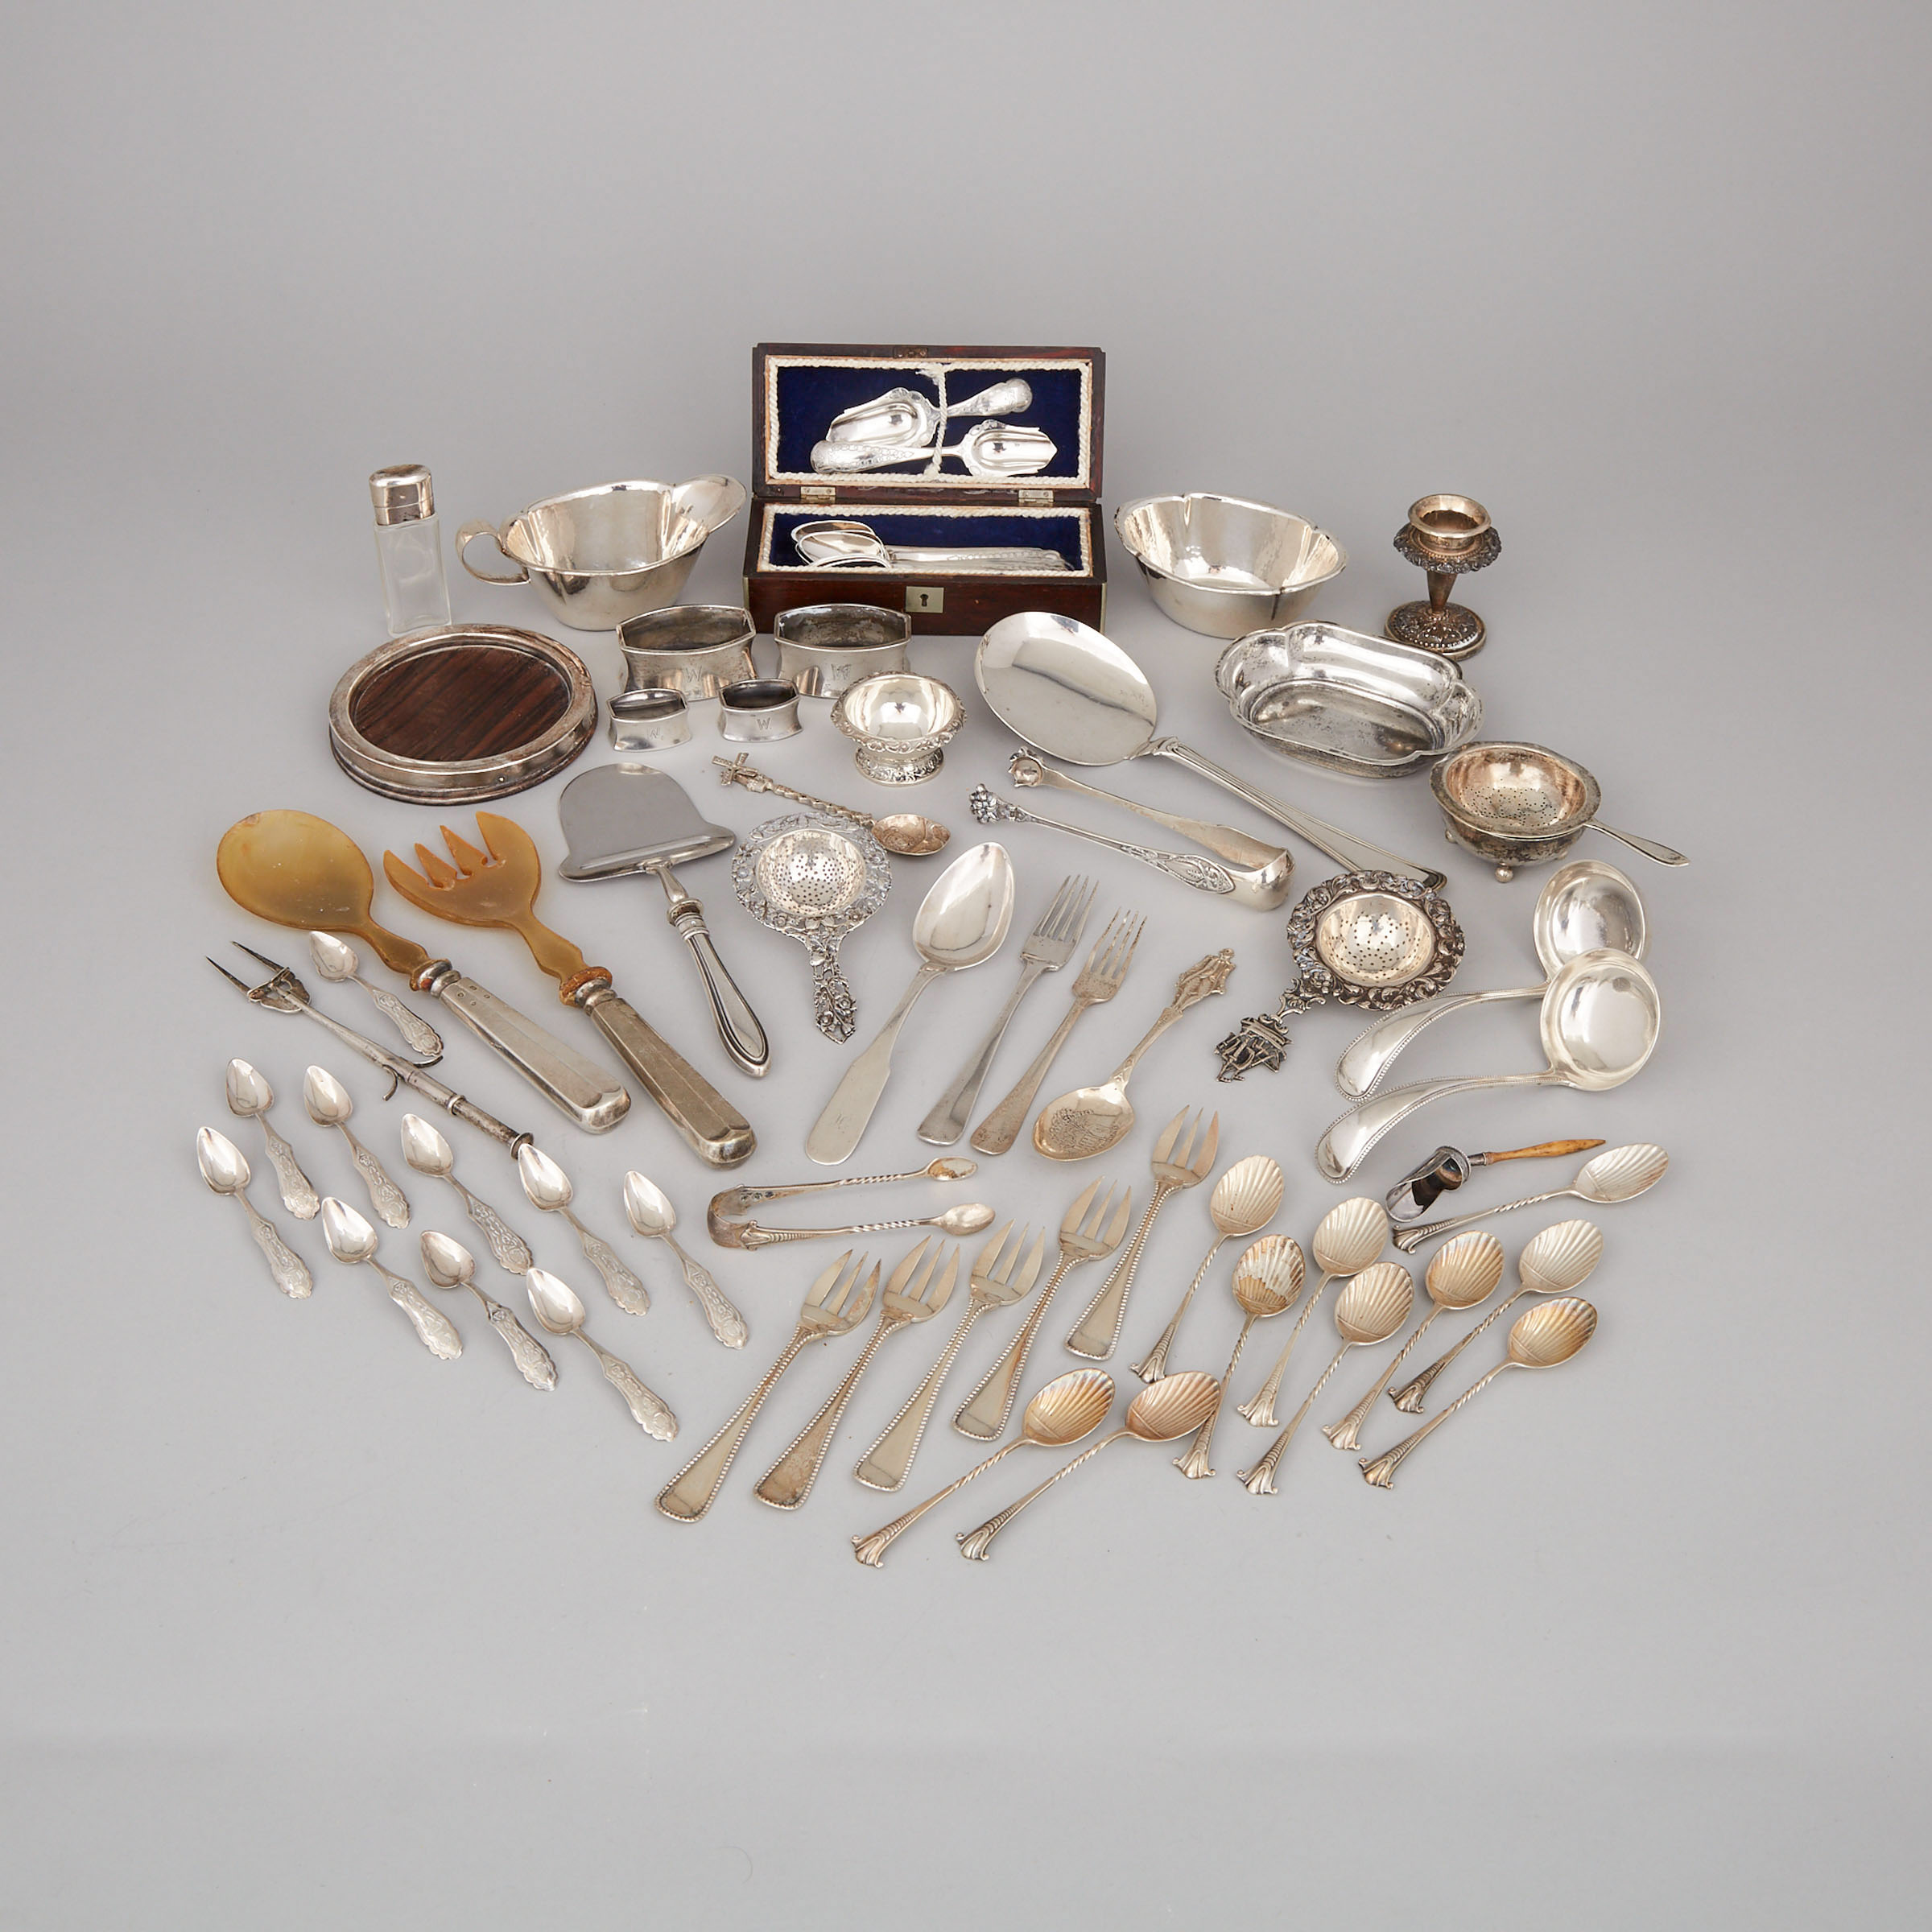 Group of Mainly Dutch and Other Continental Silver, 19th/20th century